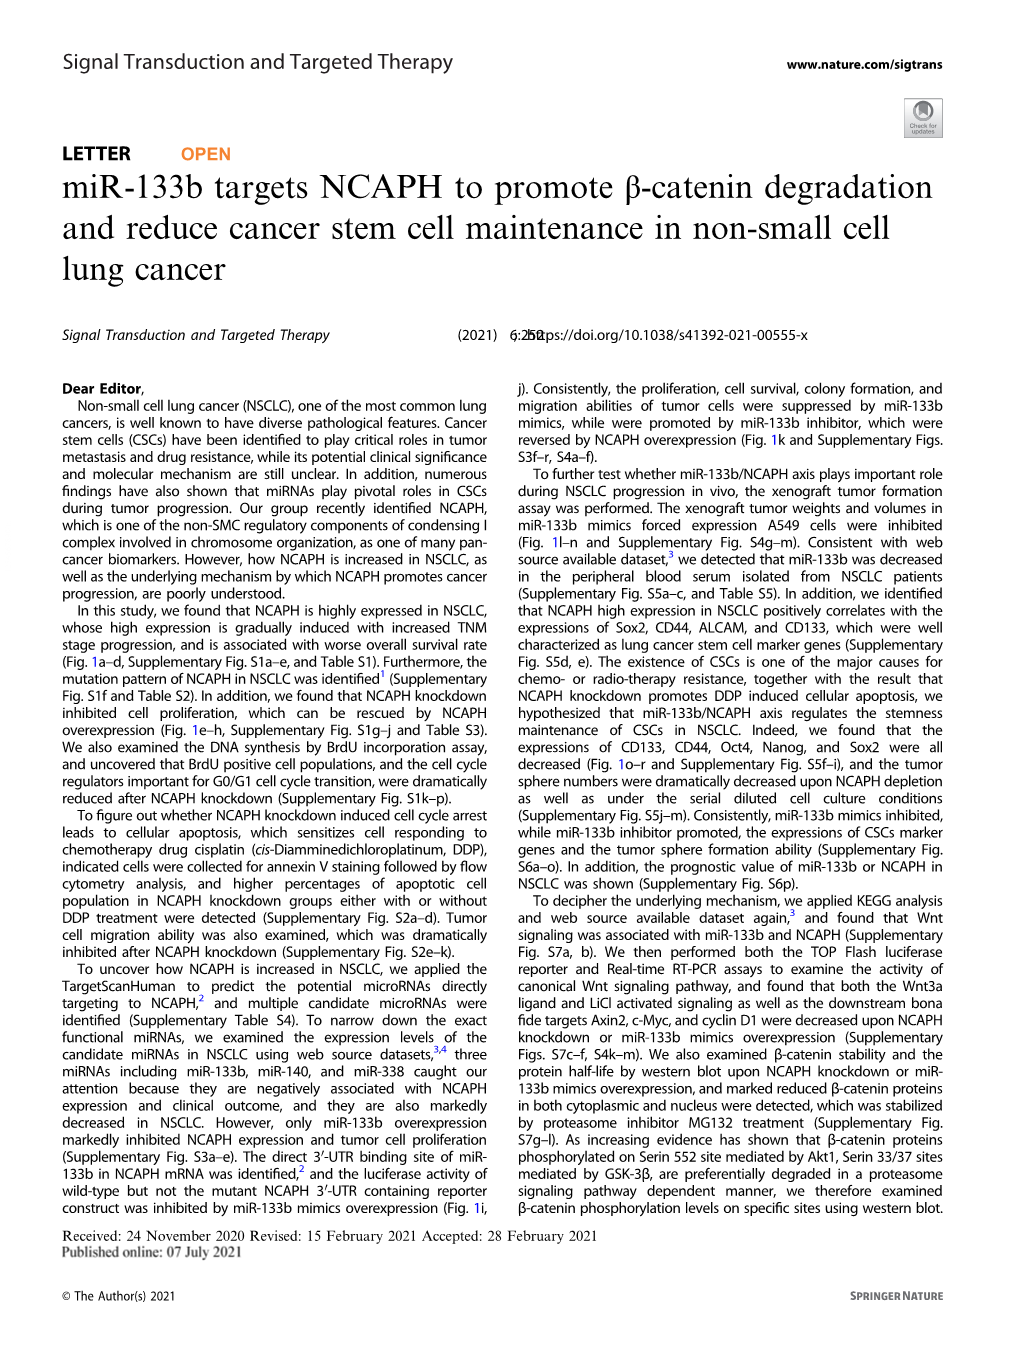 Mir-133B Targets NCAPH to Promote Β-Catenin Degradation and Reduce Cancer Stem Cell Maintenance in Non-Small Cell Lung Cancer